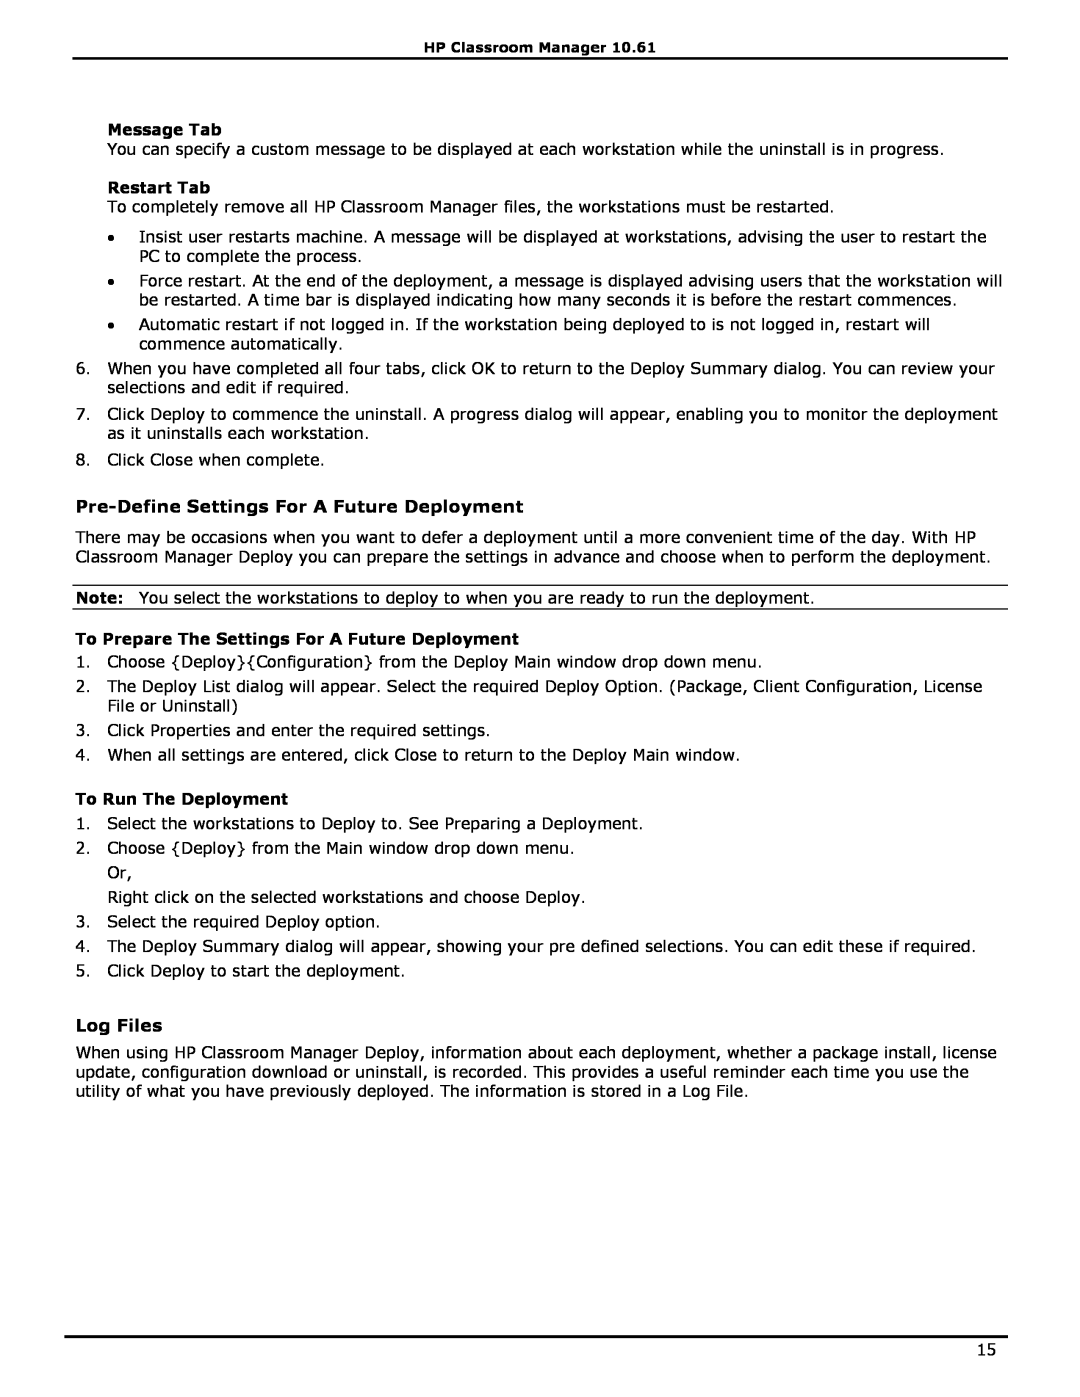 HP Classroom Manager manual Pre-Define Settings For A Future Deployment, Log Files, To Run The Deployment, Message Tab 